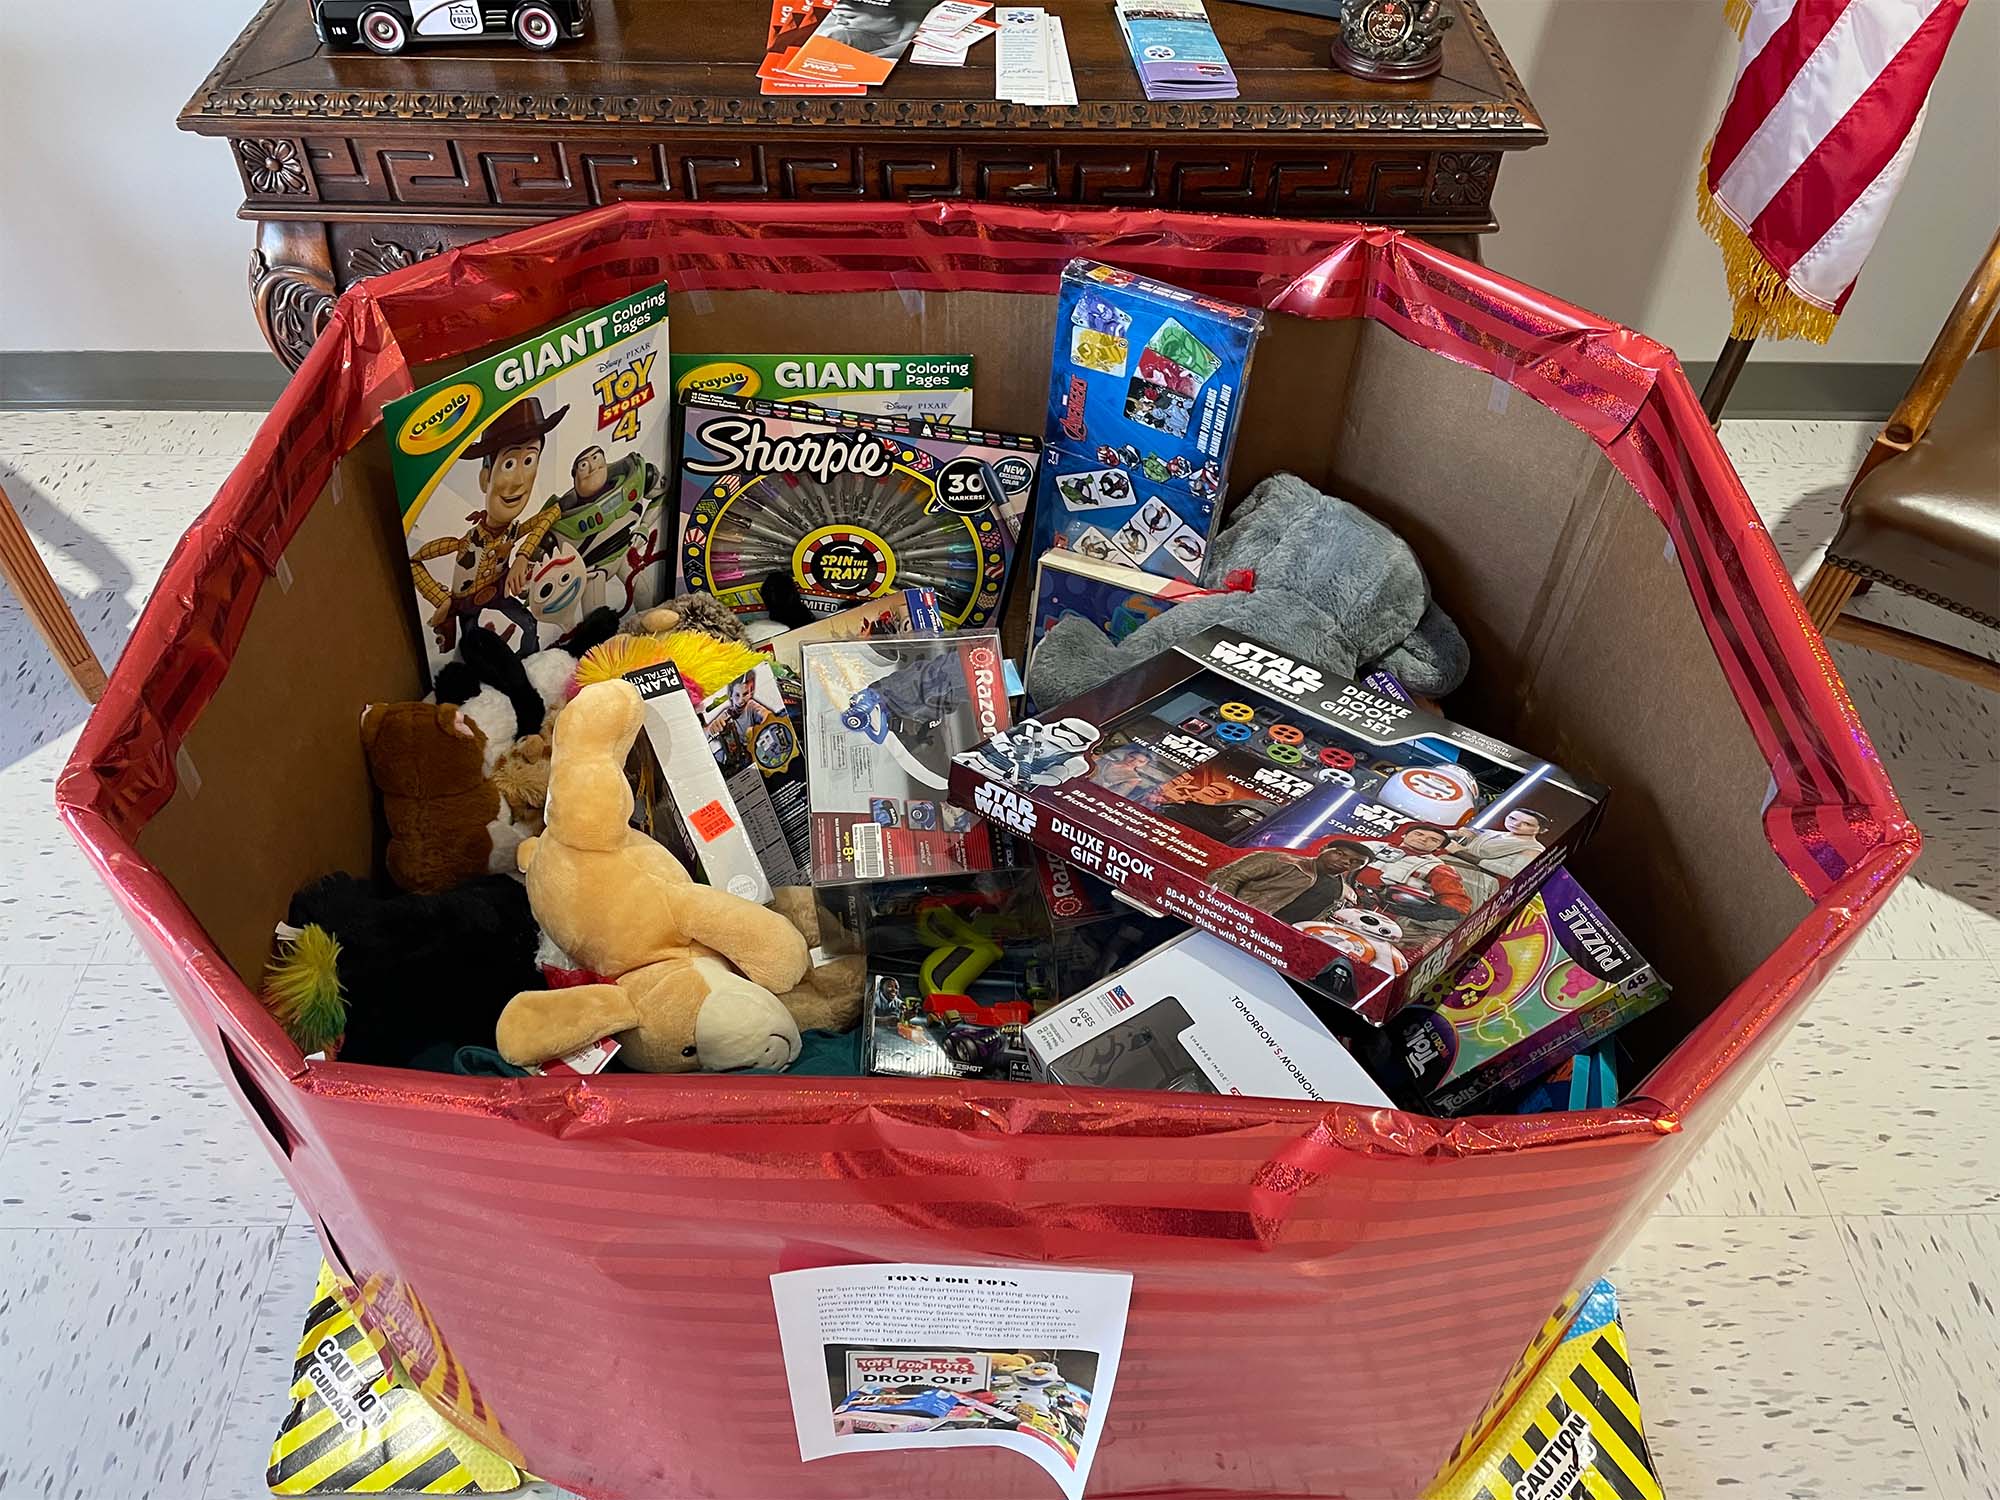 Springville Police Department accepts Toys for Tots donations